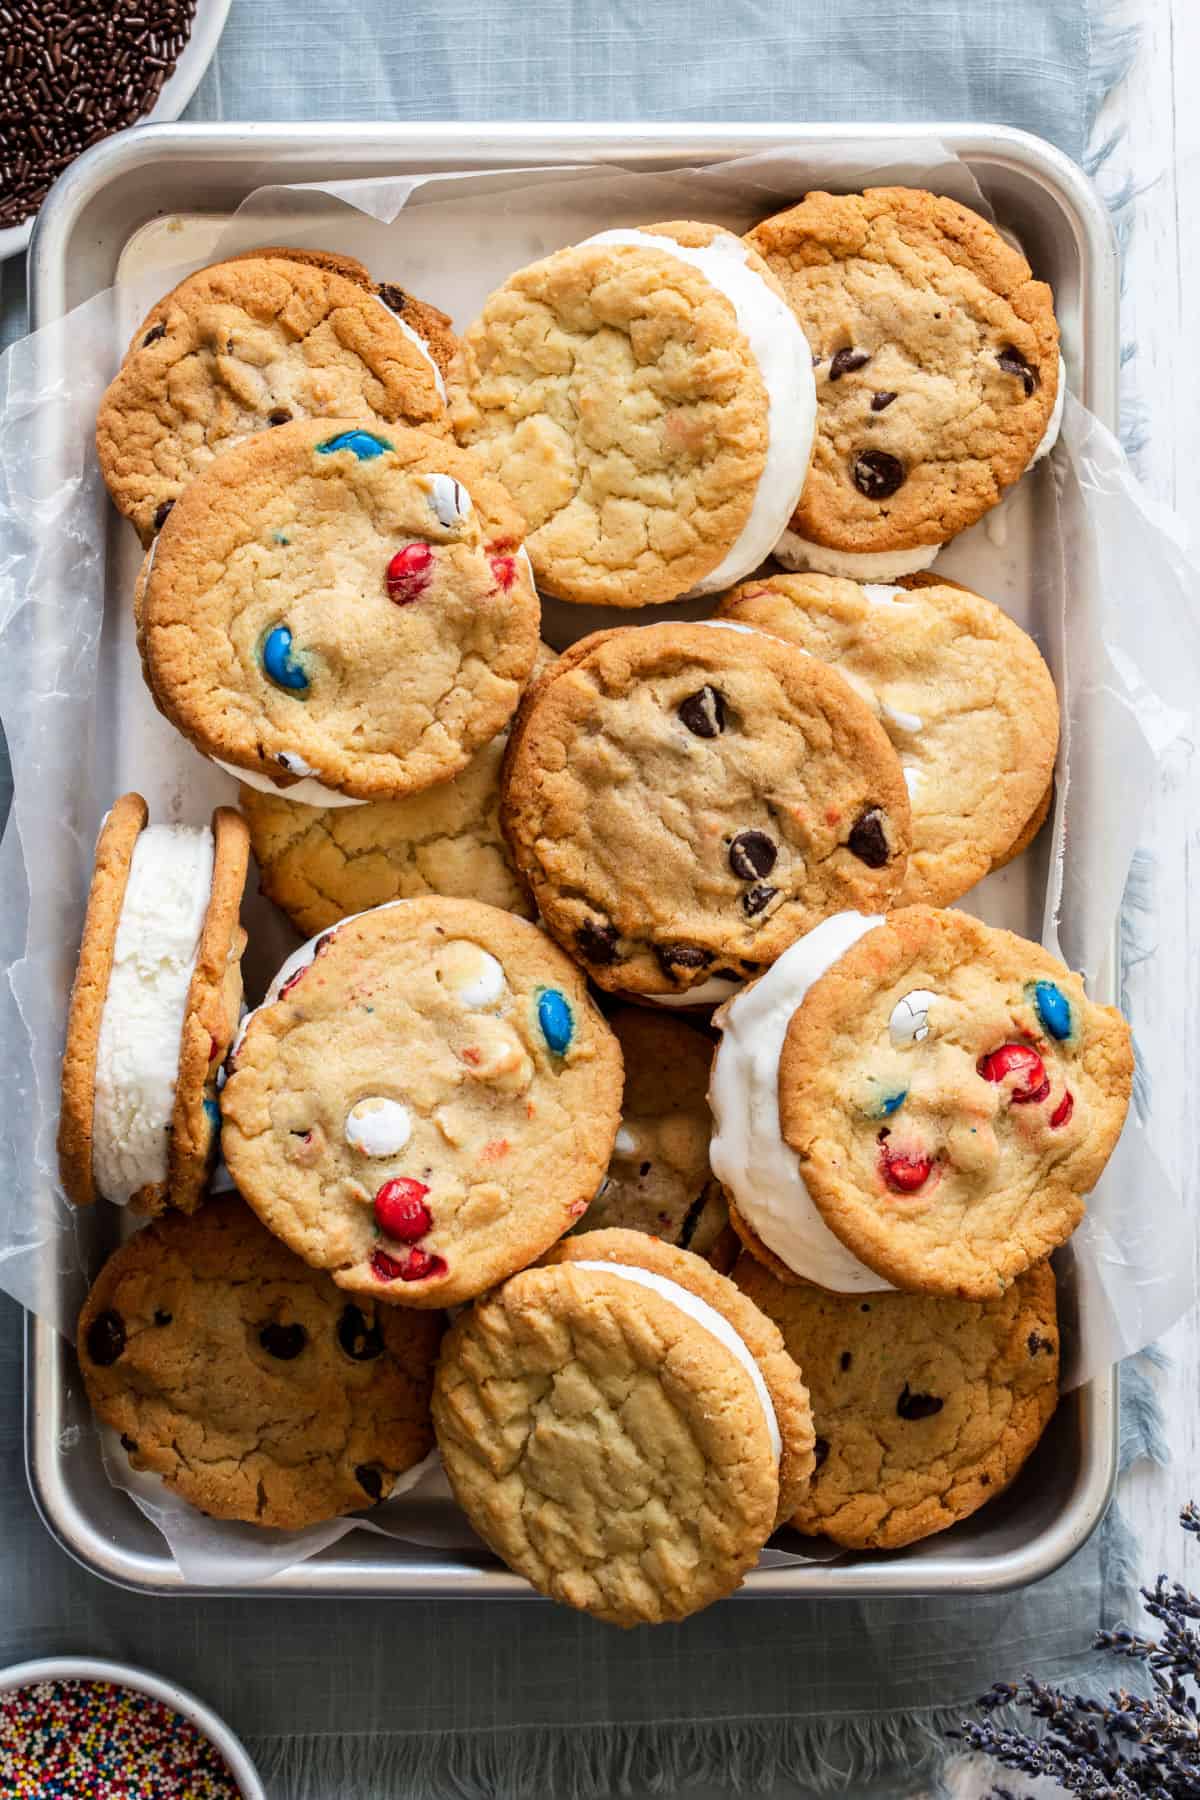 homemade ice cream sandwiches with m&m's.